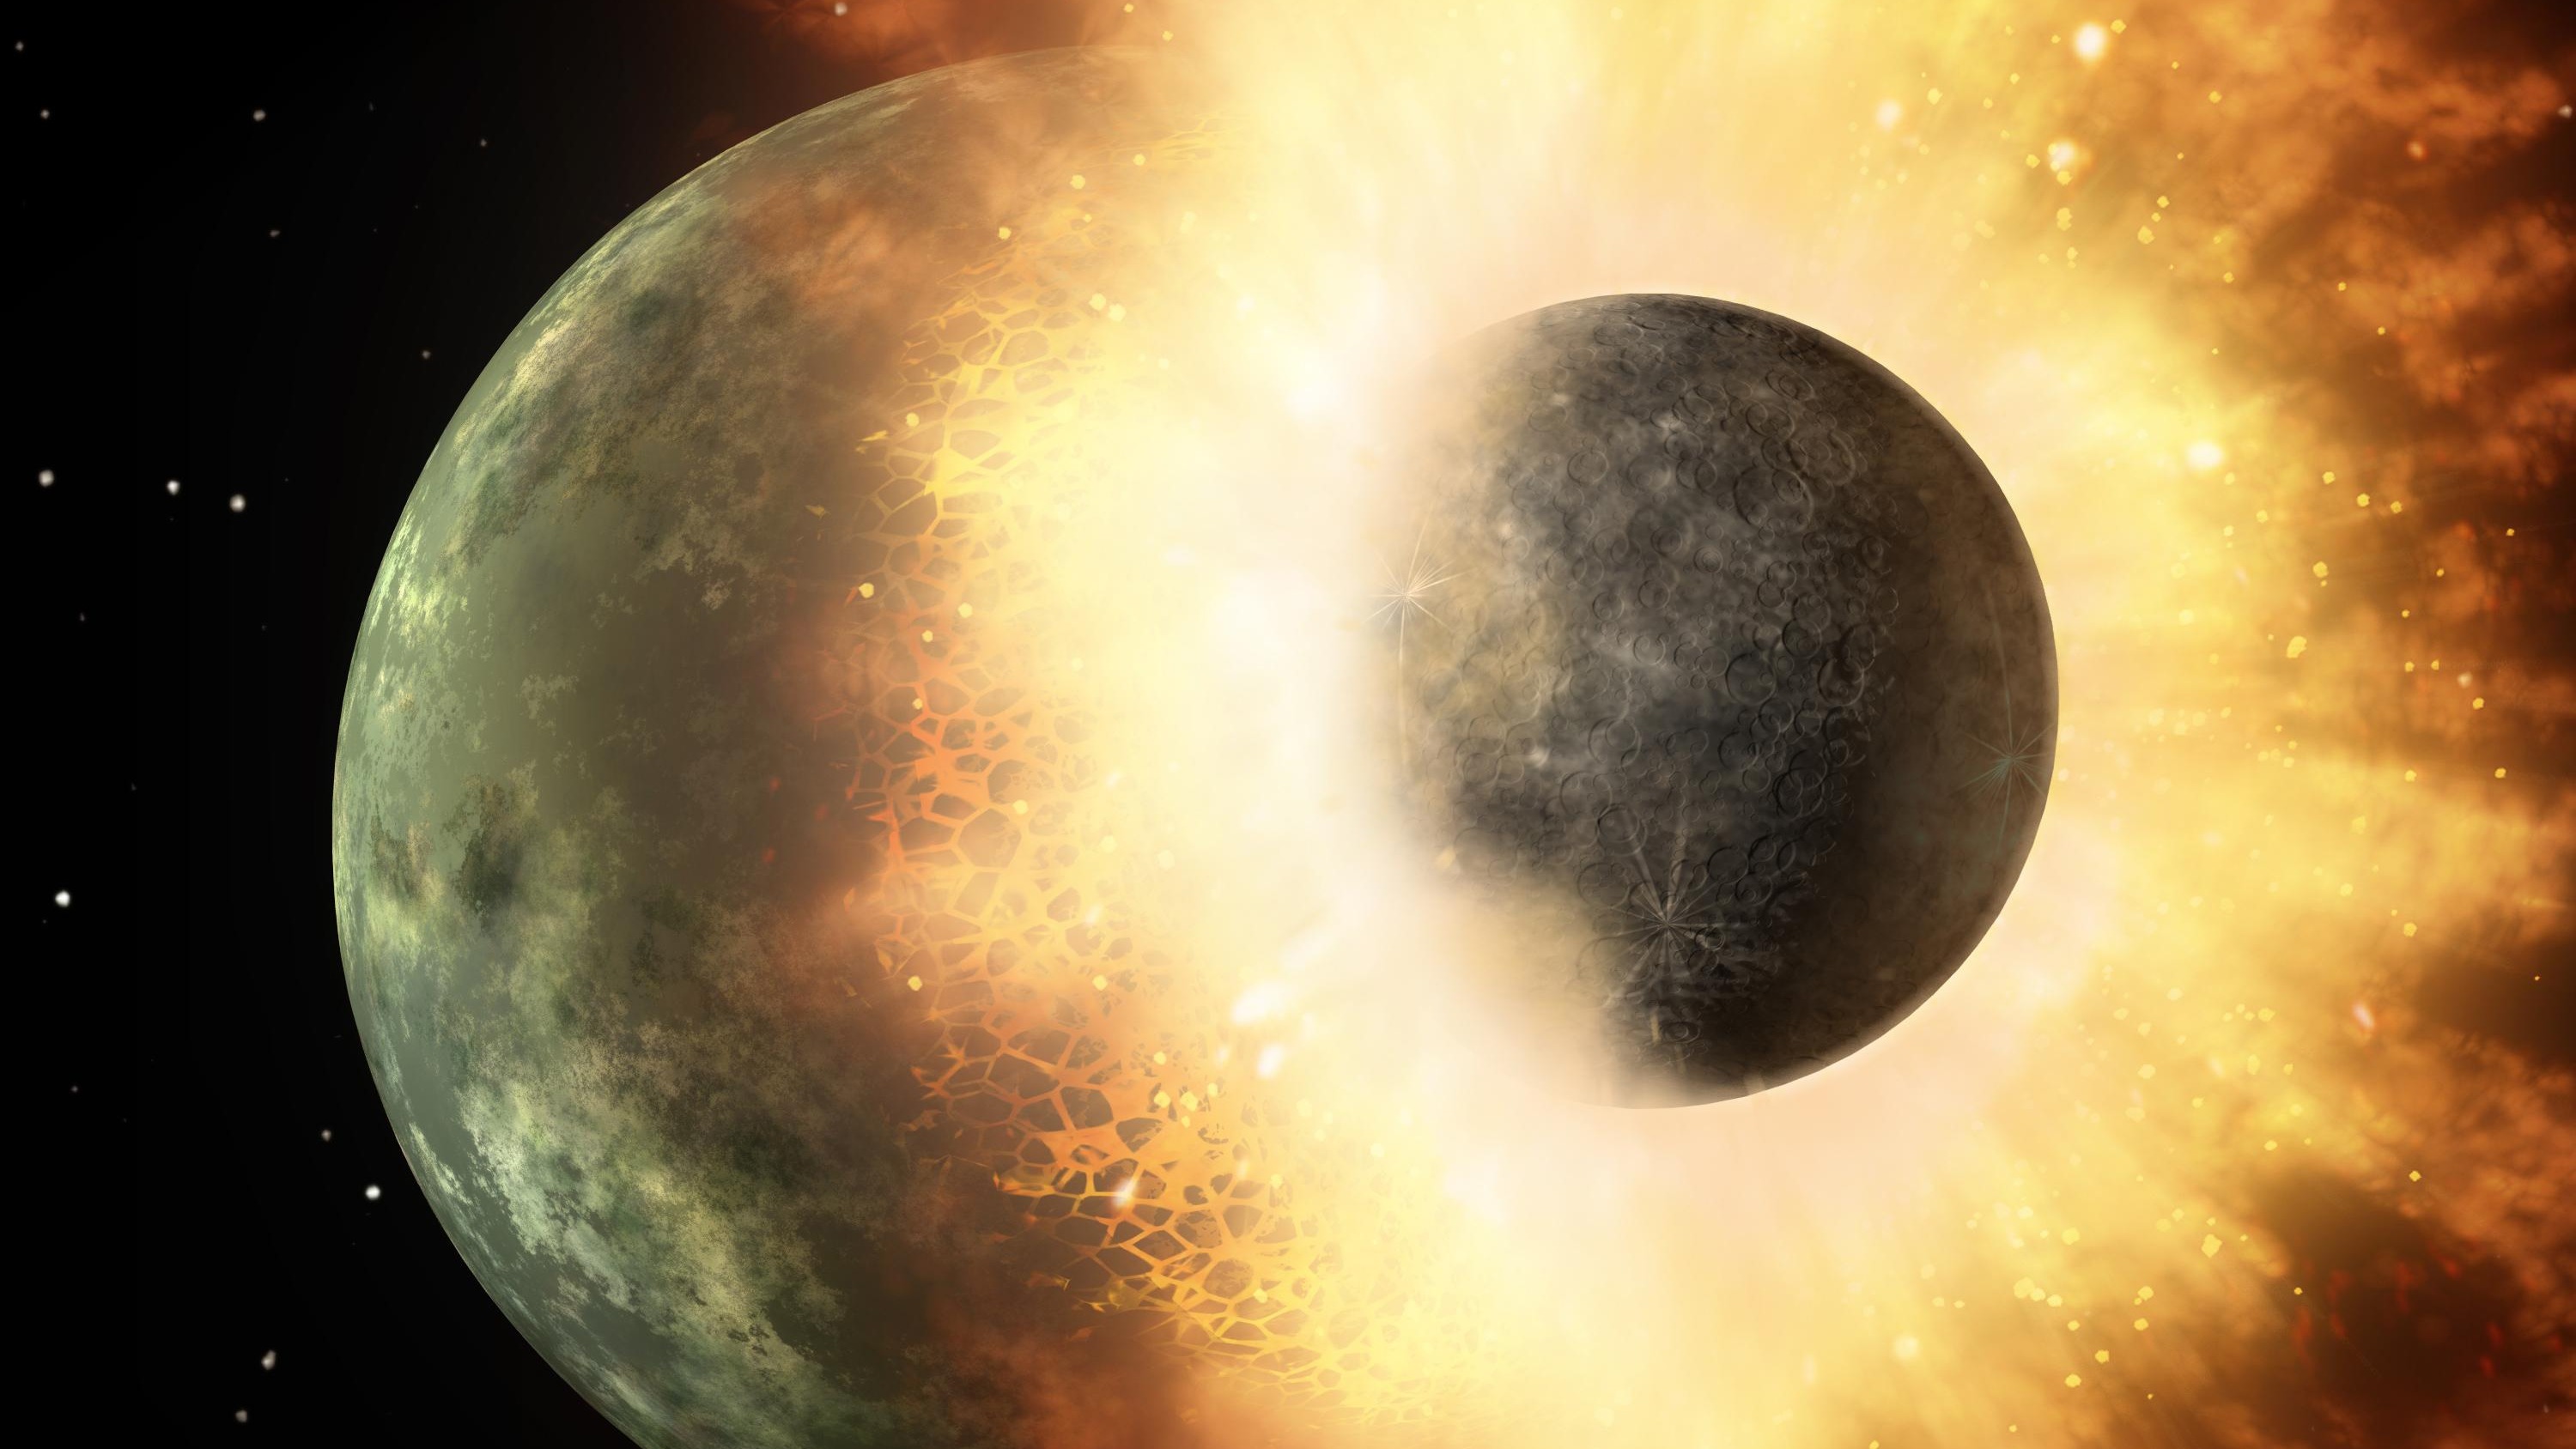 A massive space rock impact may have kickstarted Earth's magnetic field